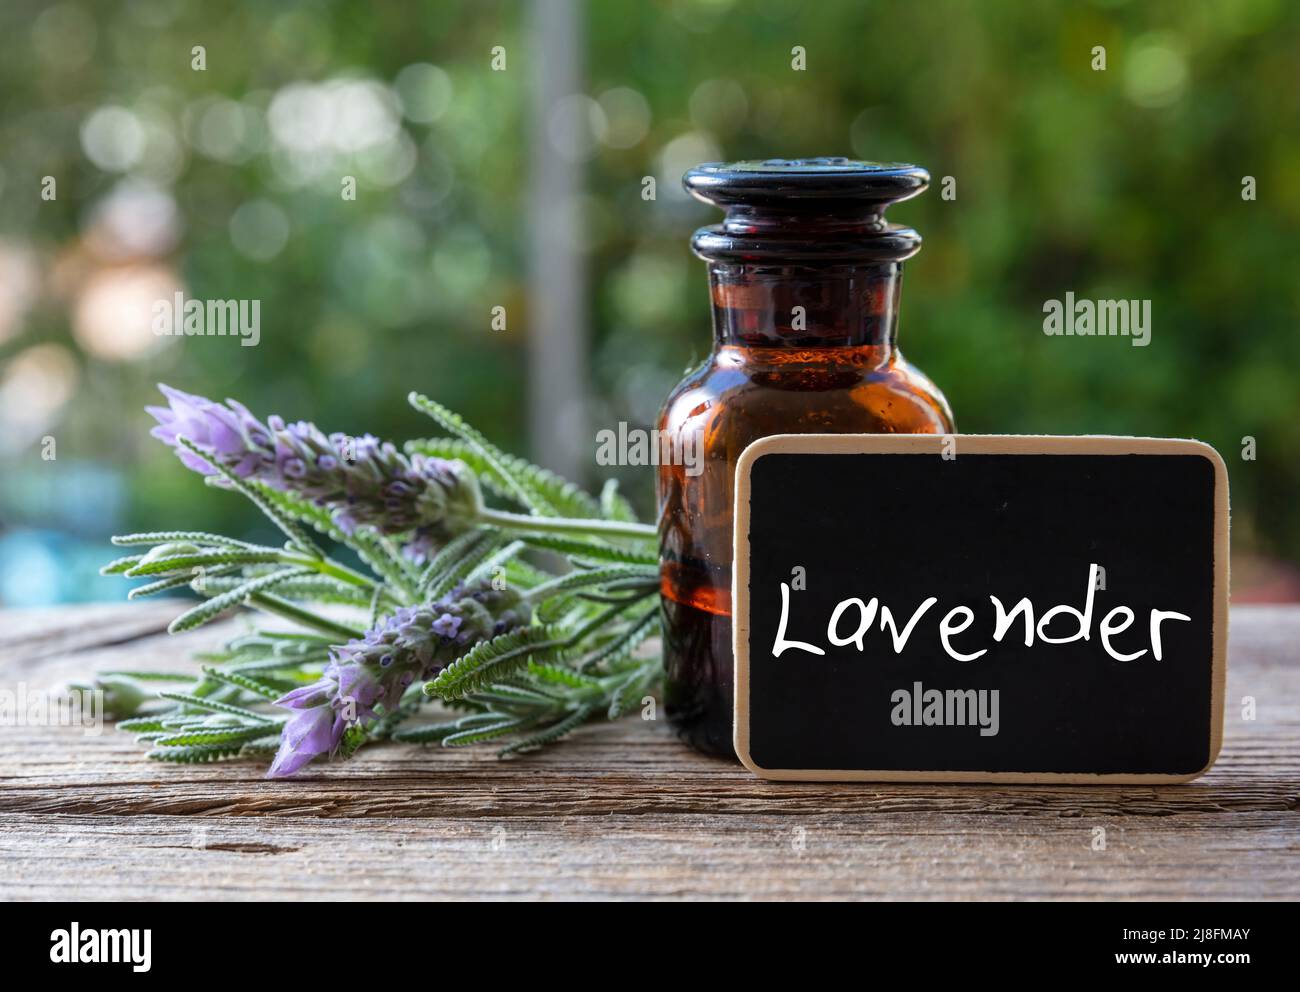 Lavender essential oil glass bottle on wooden table, close up view. Aromatherapy blooming herb, label with text Lavender, blur nature background Stock Photo